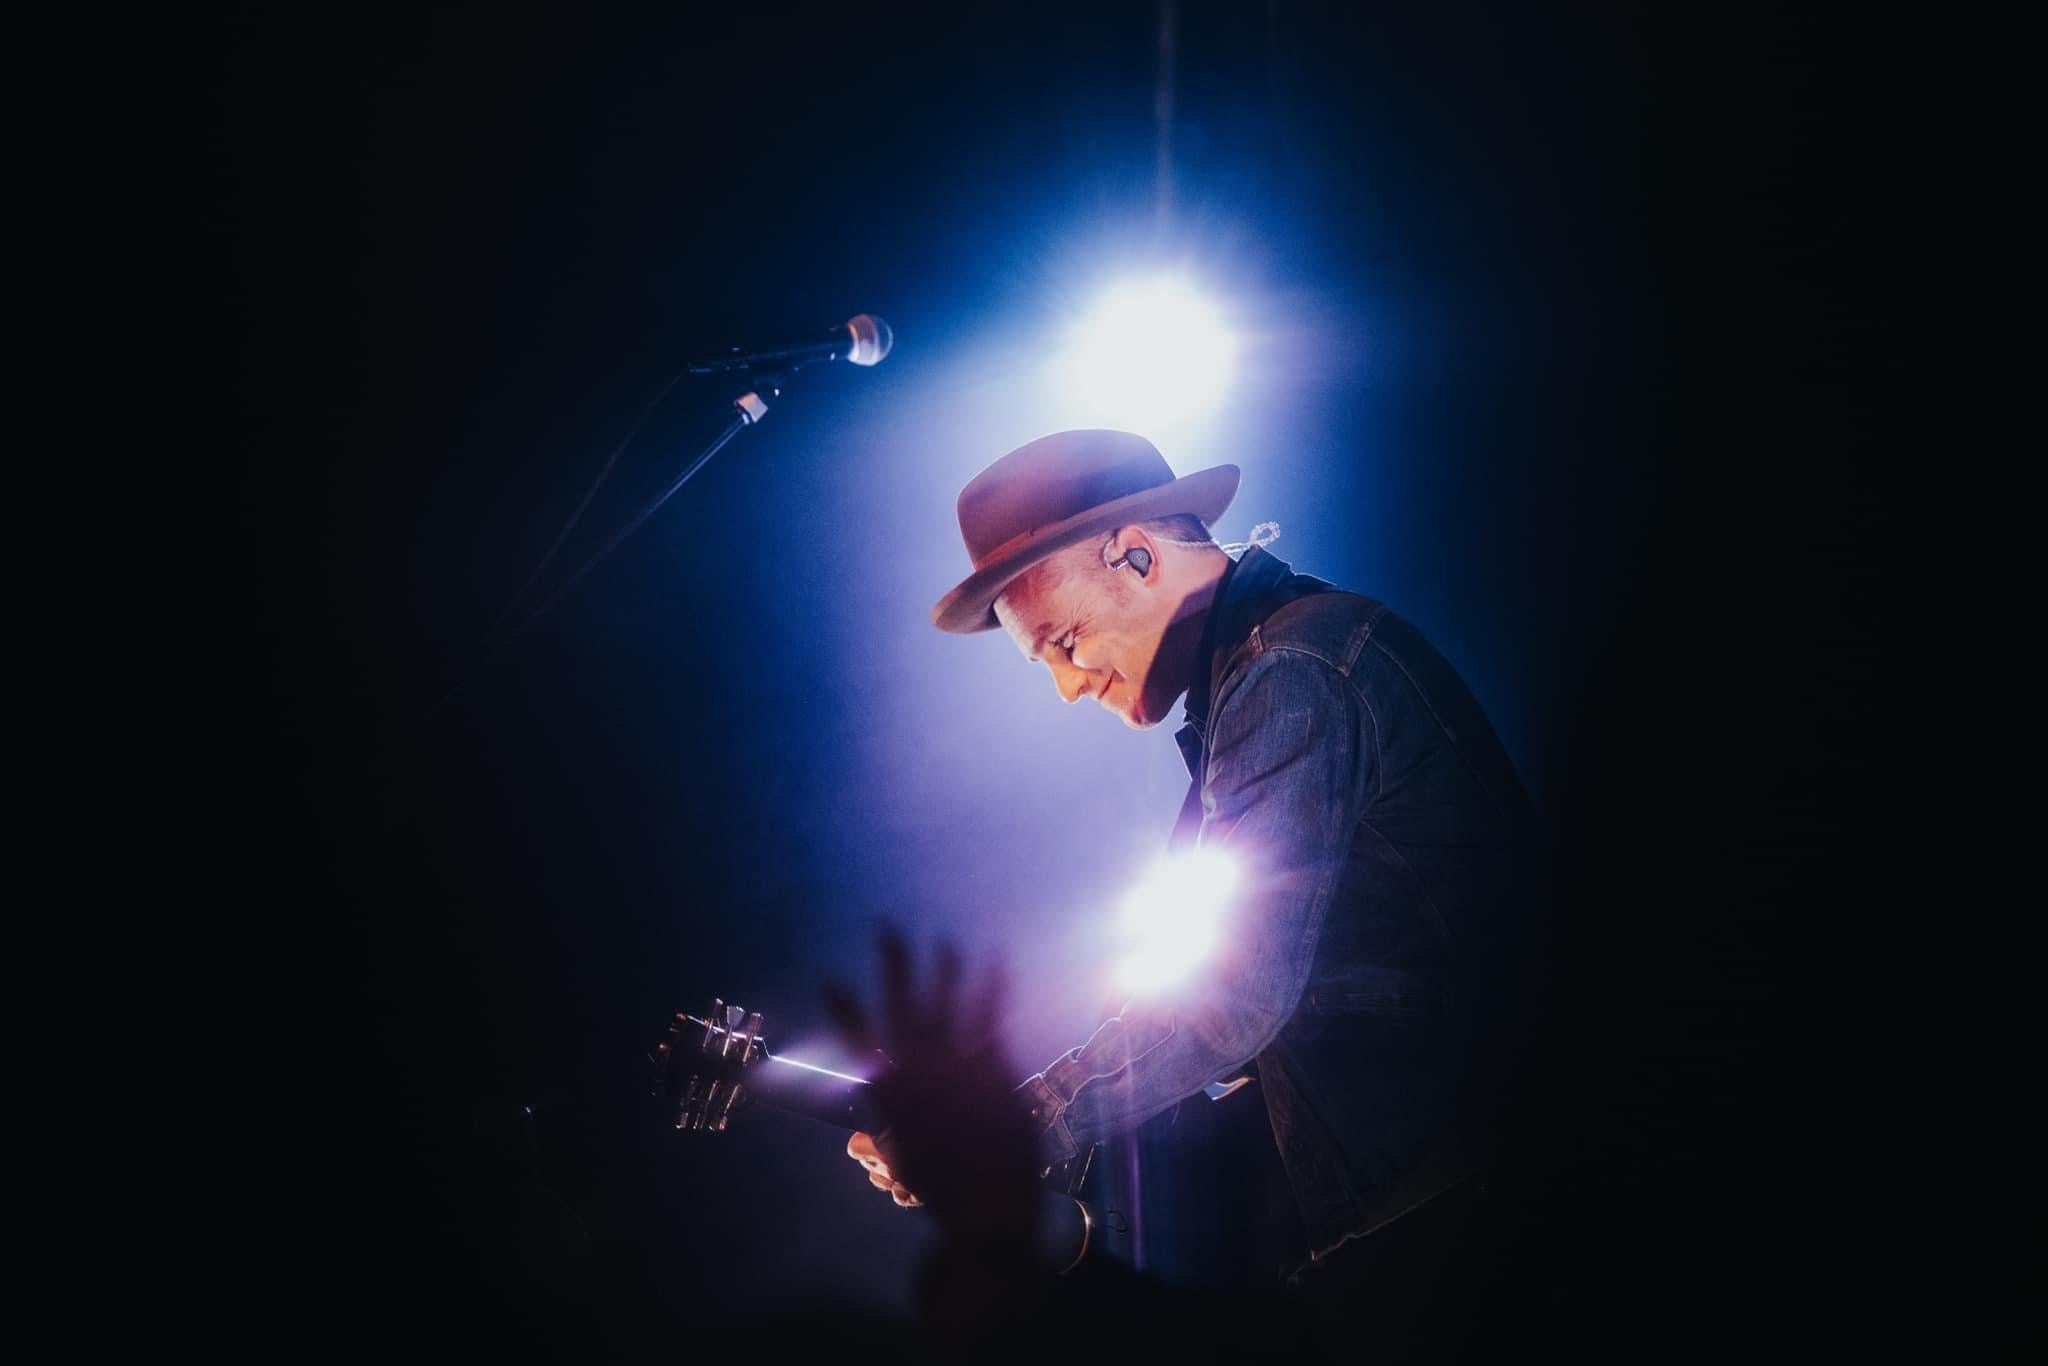 A musician wearing IEMs and a hat plays an acoustic guitar under a spotlight